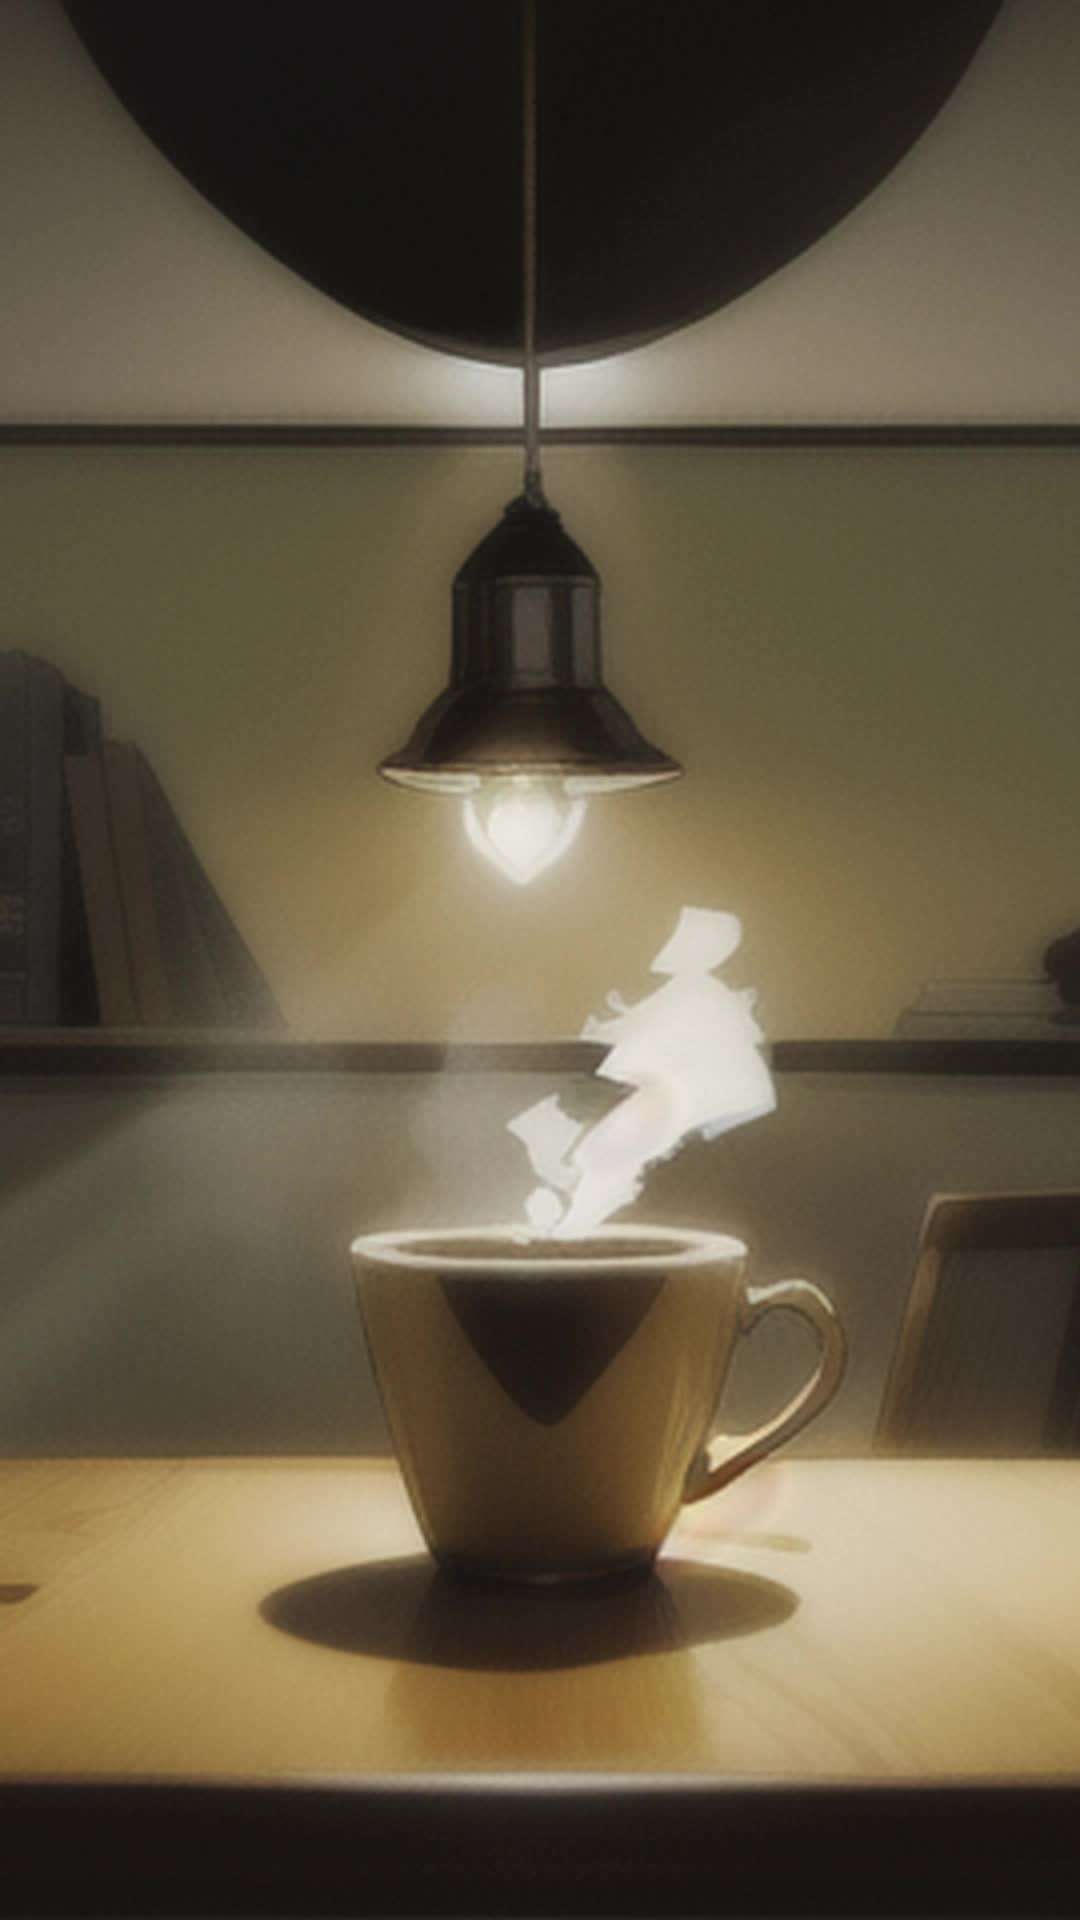 a very dark room where there is a small lightbulb hanging from the ceiling shining on a cup of smoking coffee on the table